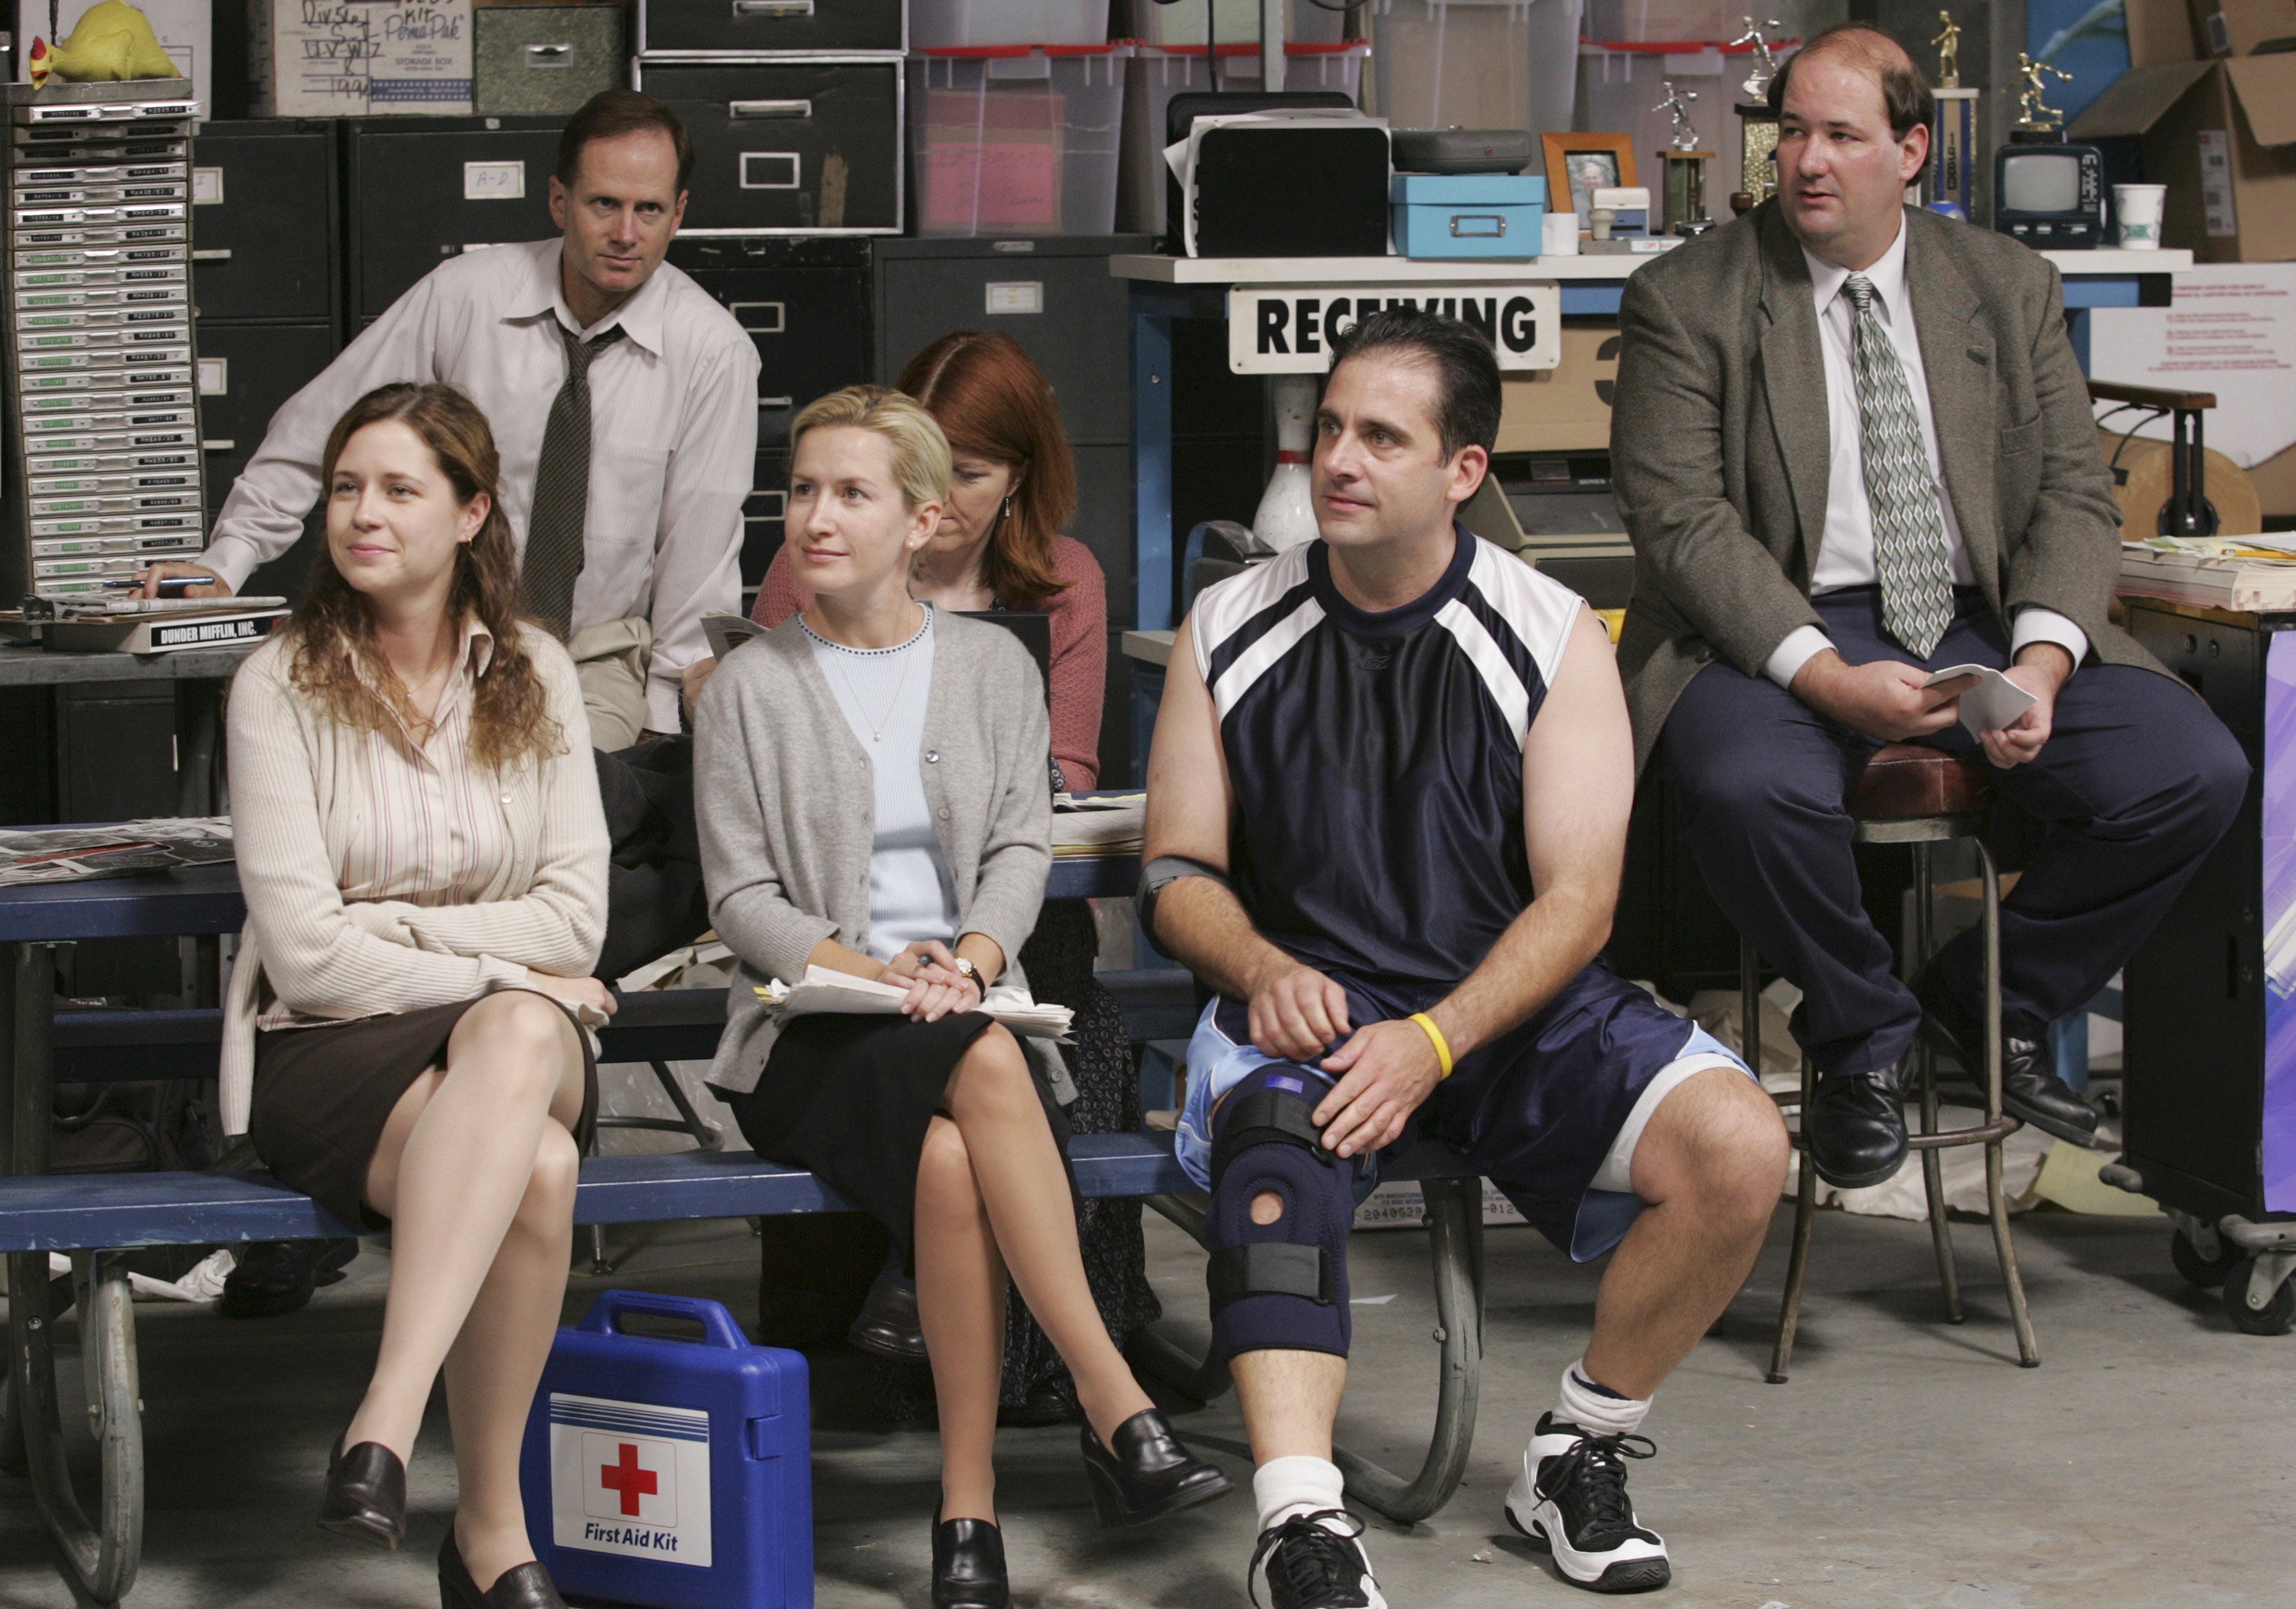 Jenna Fischer as Pam Beesly, Devon Abner as Devon, Angela Kinsey as Angela Martin, Kate Flannery as Meredith Palmer, Steve Carell as Michael Scott, and Brian Baumgartner as Kevin Malone in the 'Basketball' episode of 'The Office'